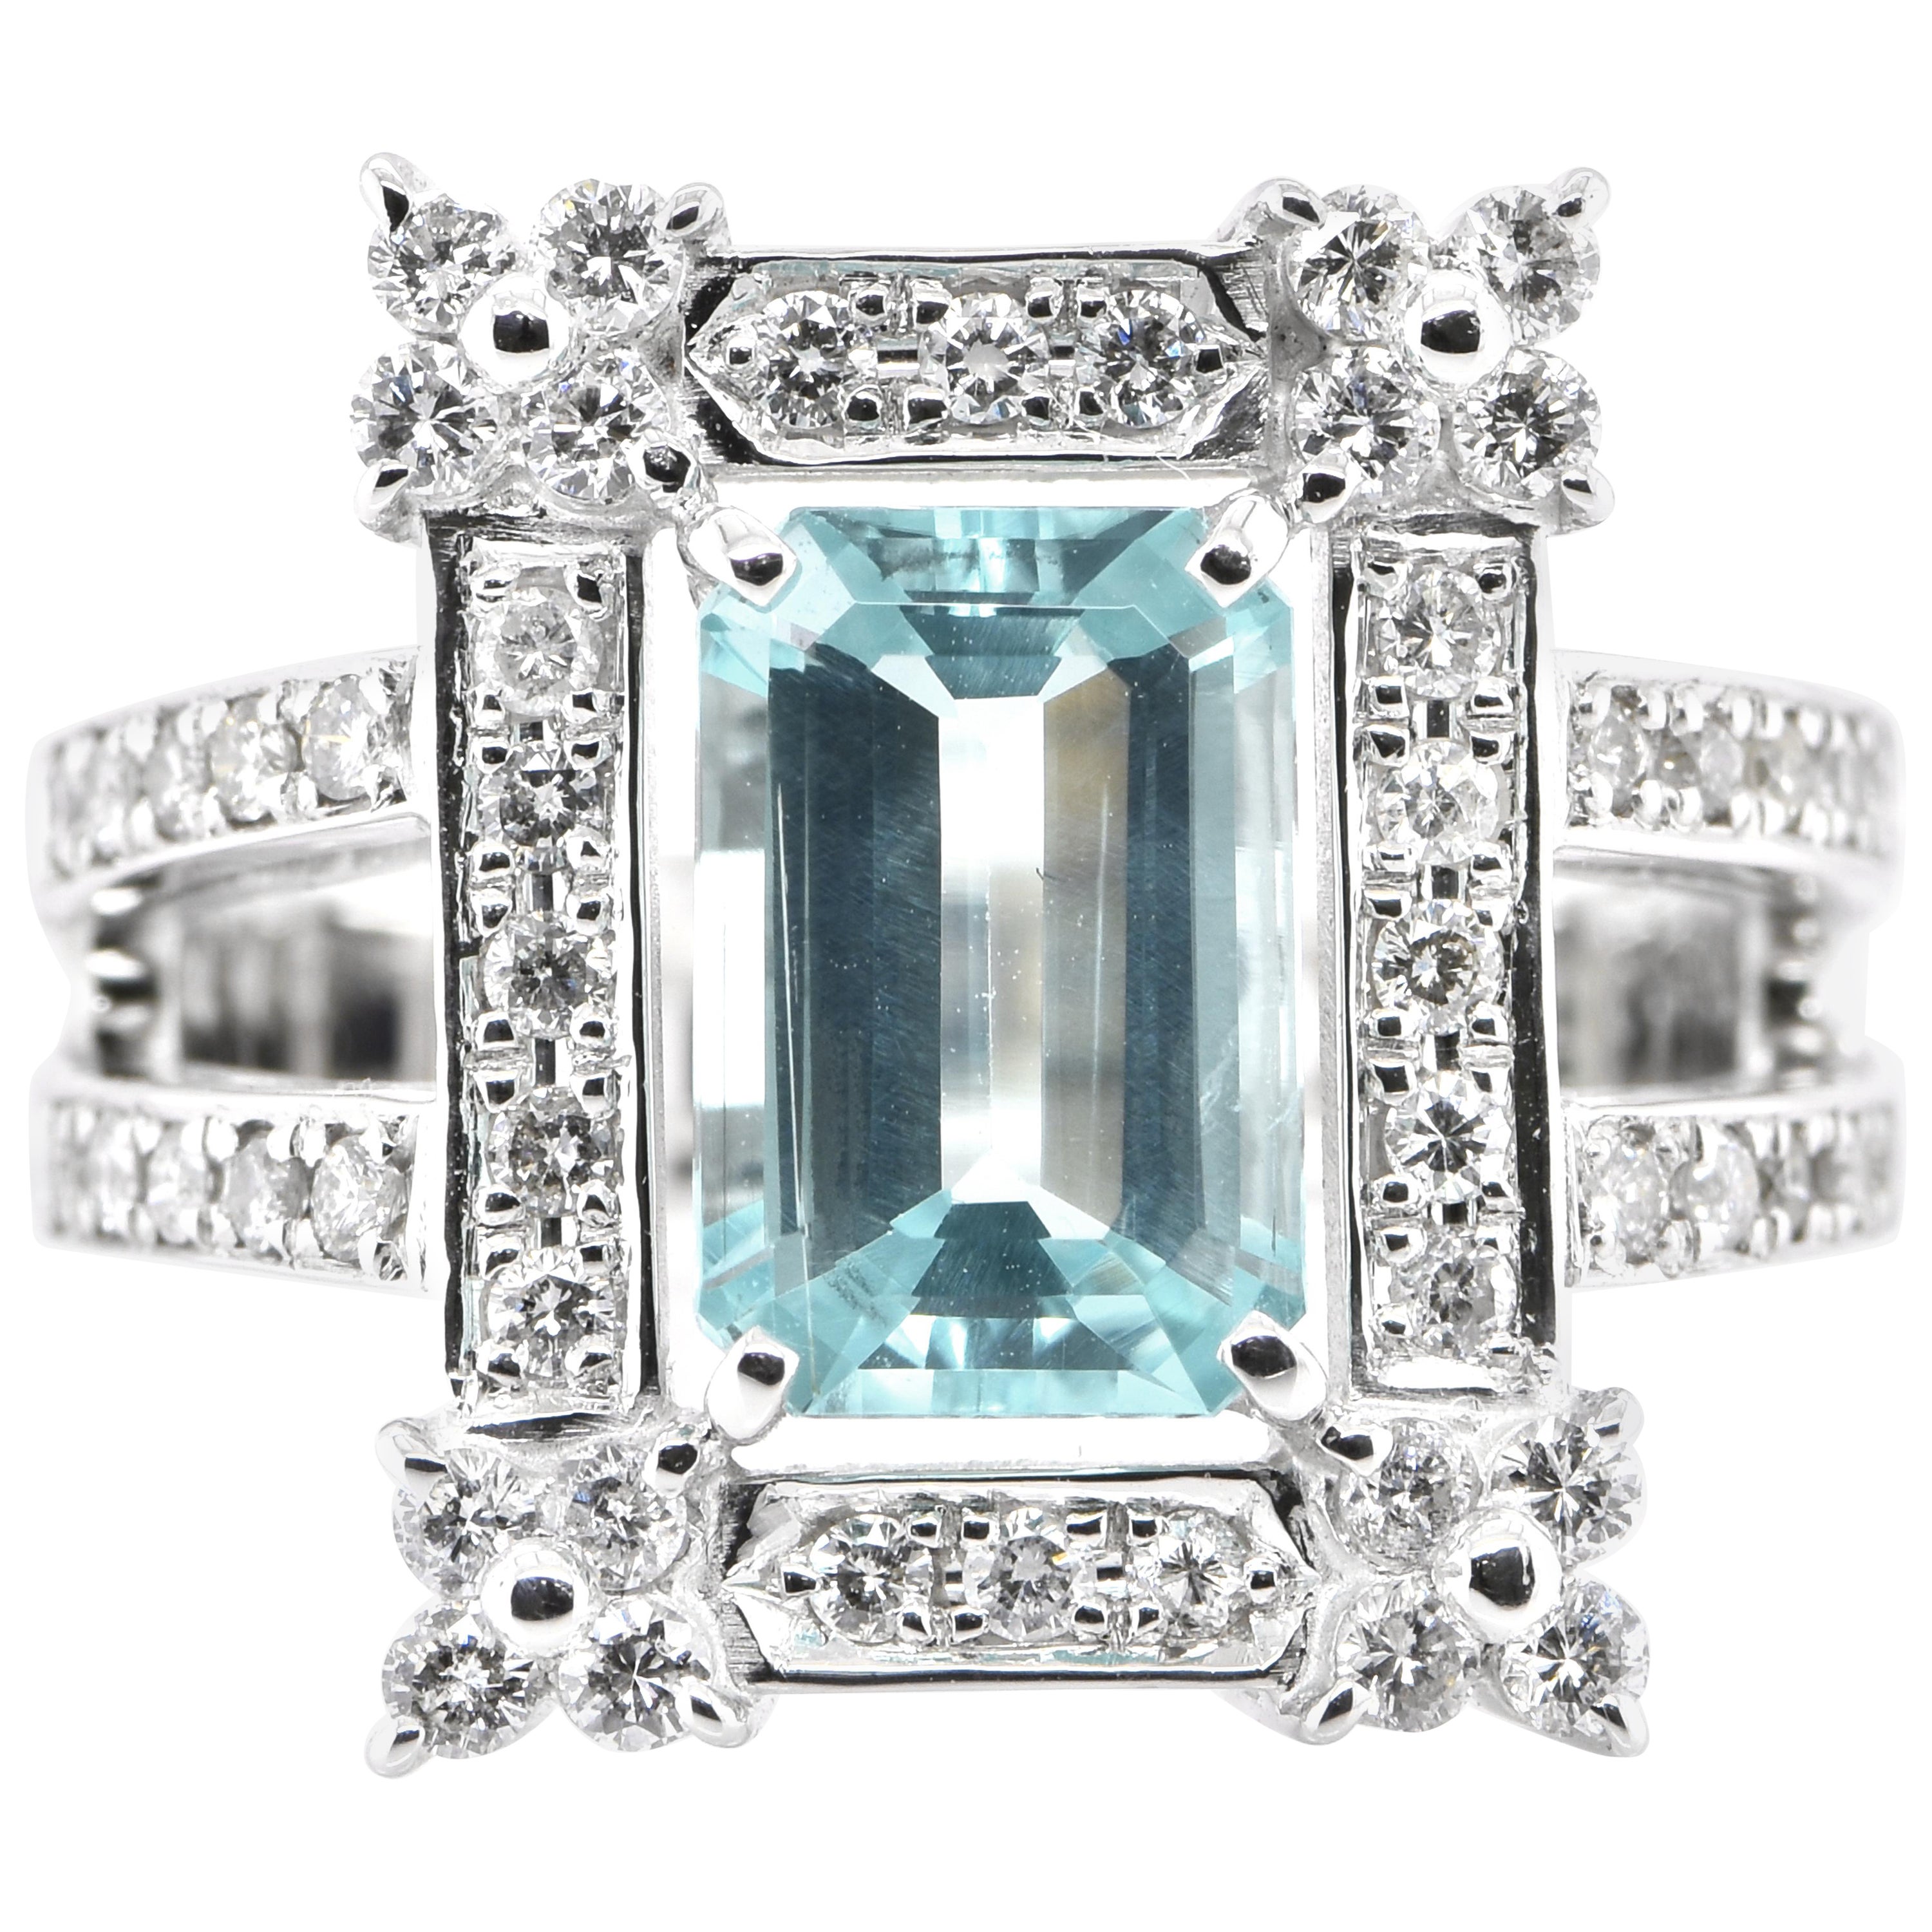 2.38 Carat Natural Paraiba Tourmaline and Diamond Ring Set in 18K White Gold For Sale